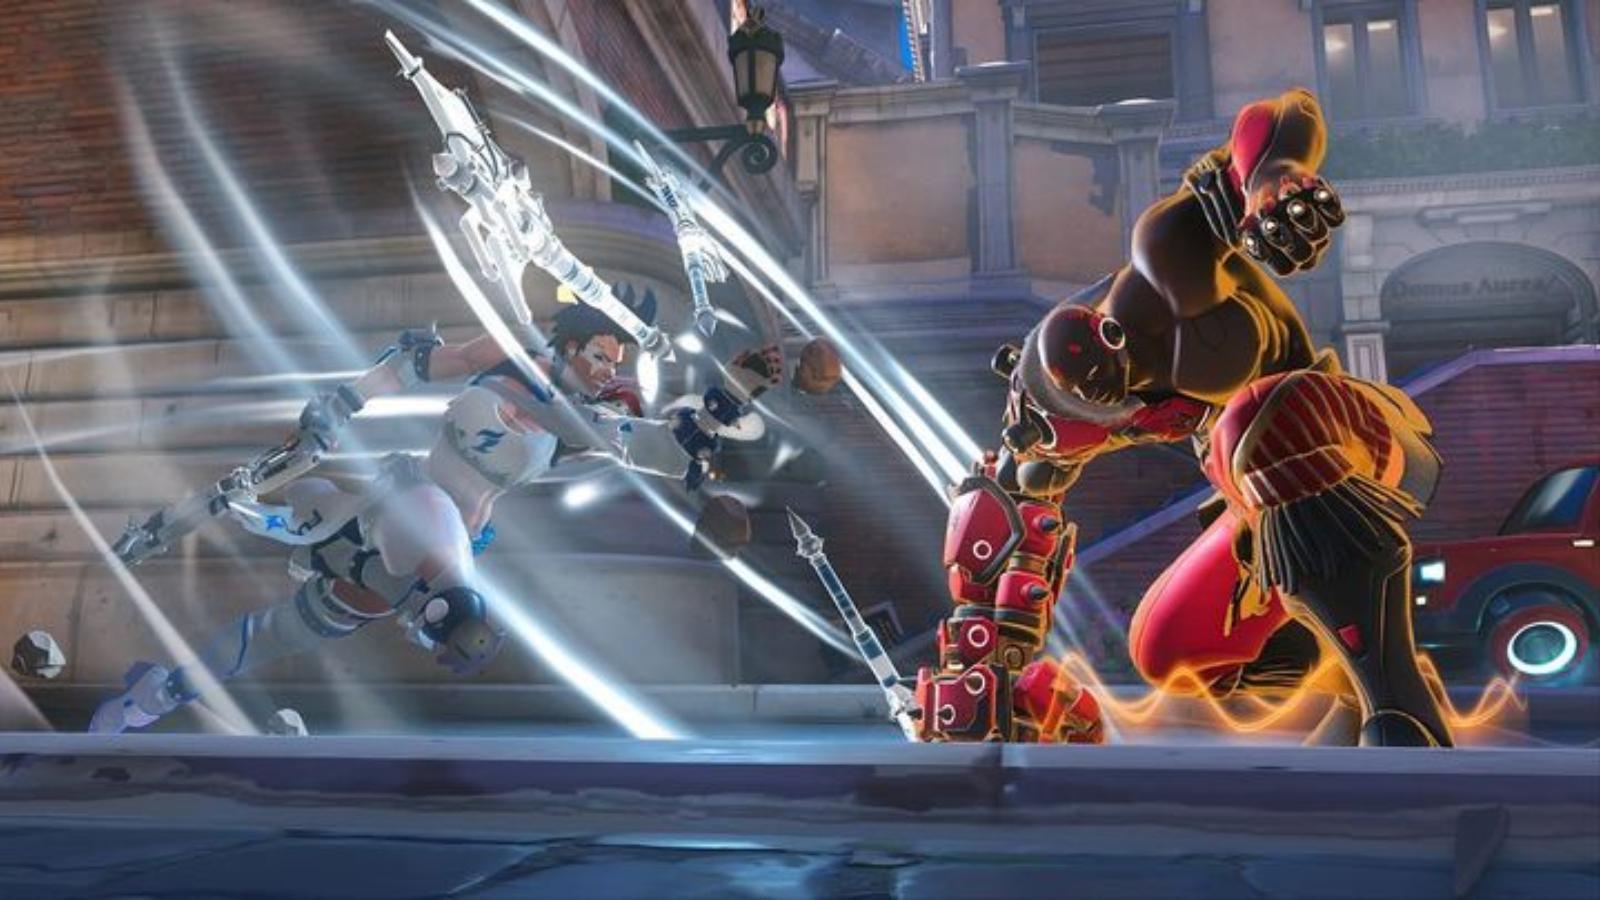 10 Heroes of the Storm skins that need to be added to Overwatch - Dexerto